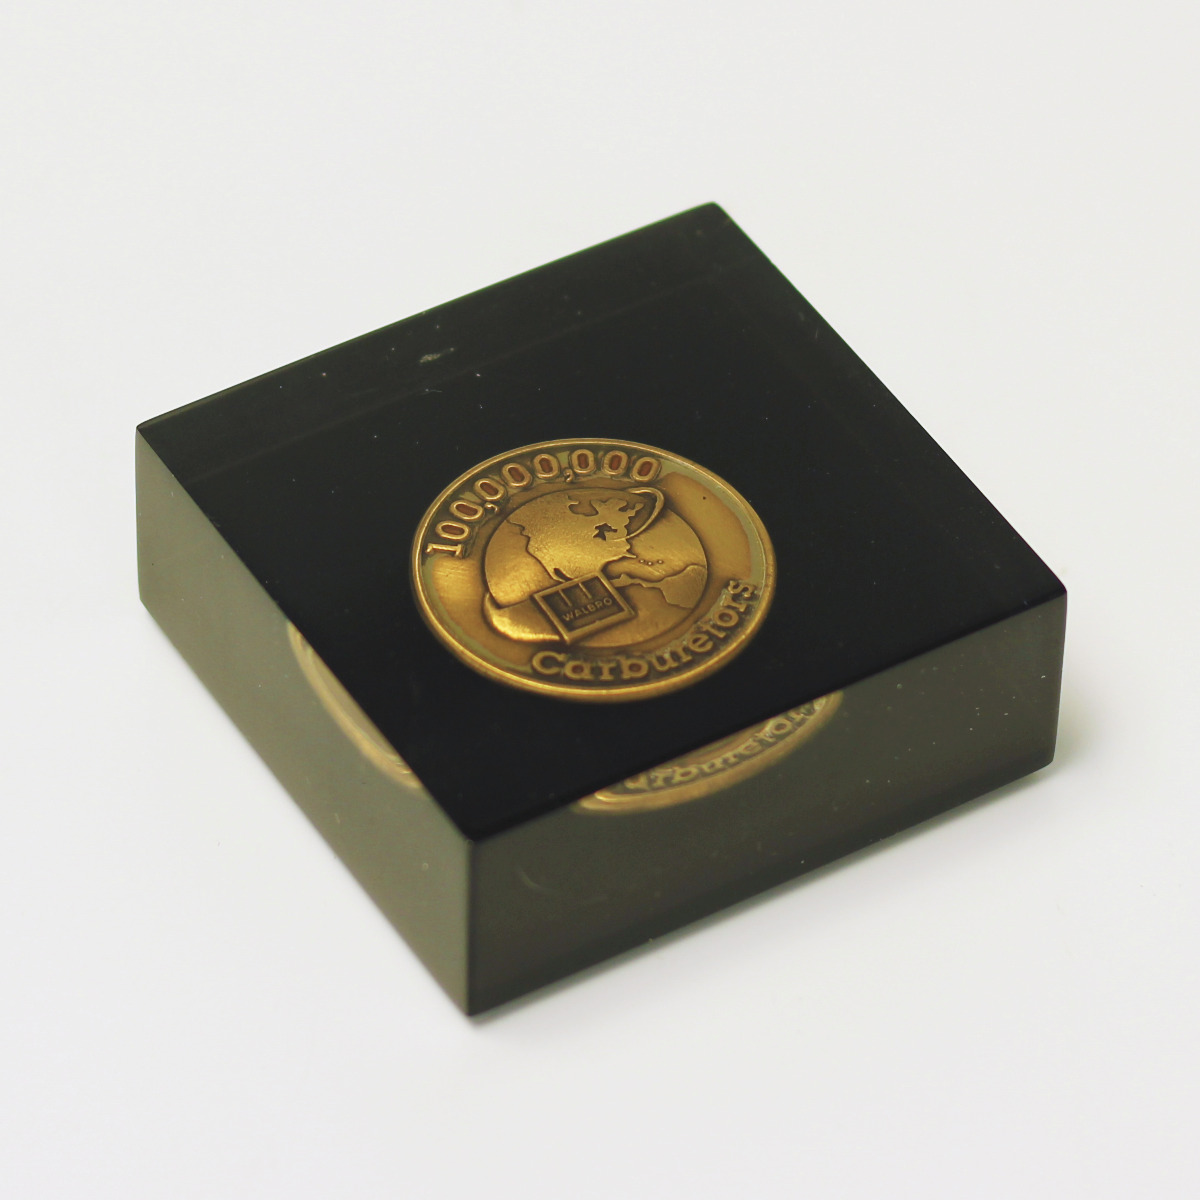 Custom Lucite award with embedded coin